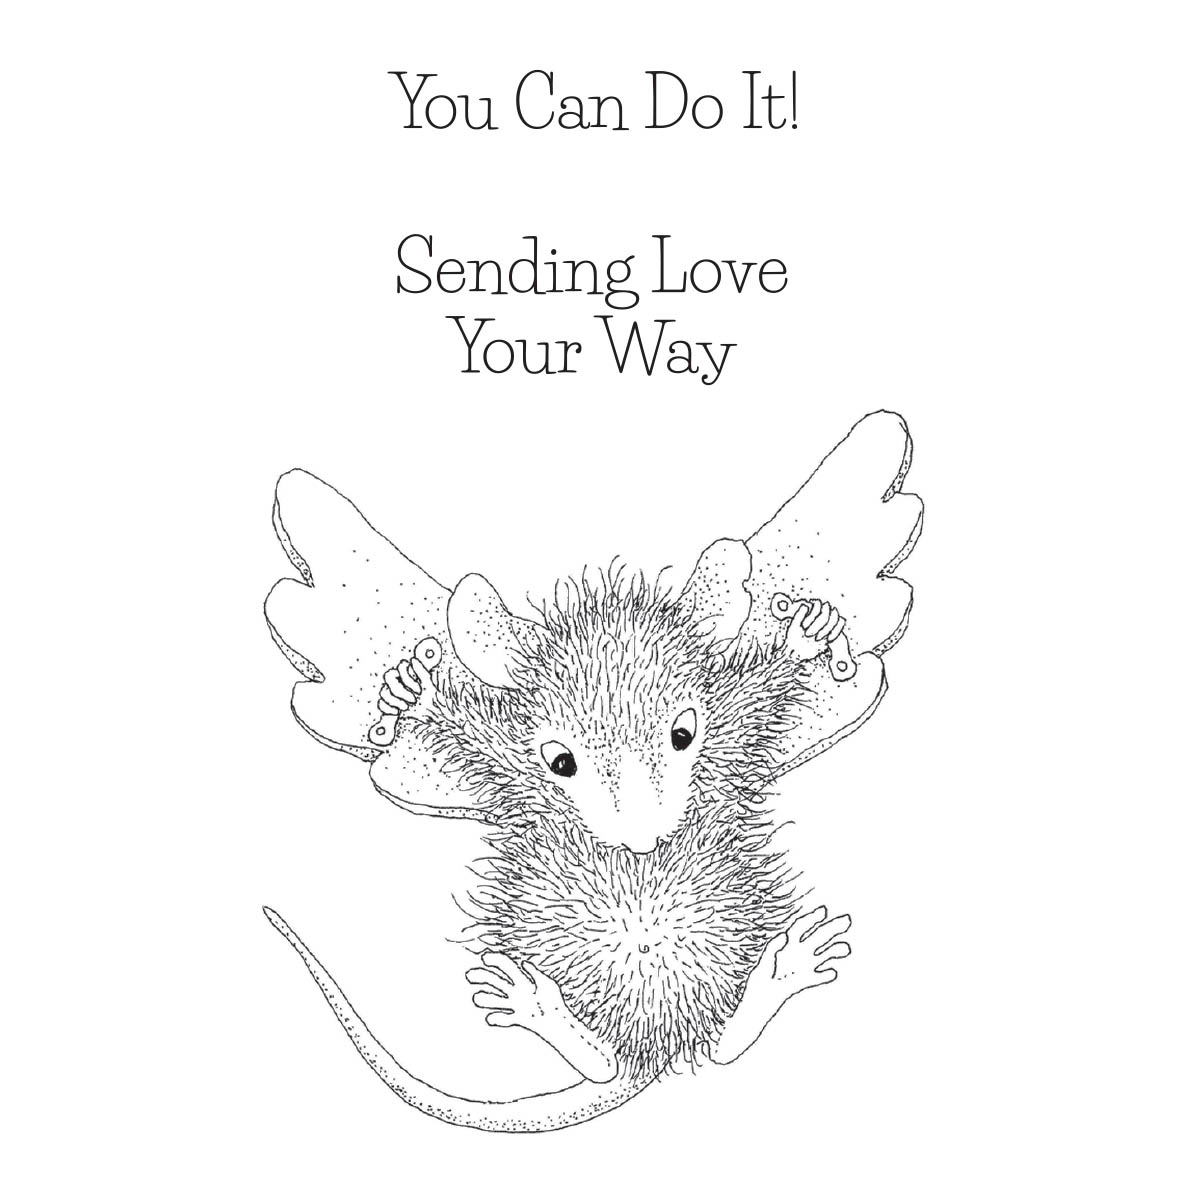 Spellbinders House Mouse Stamp Flying To See You